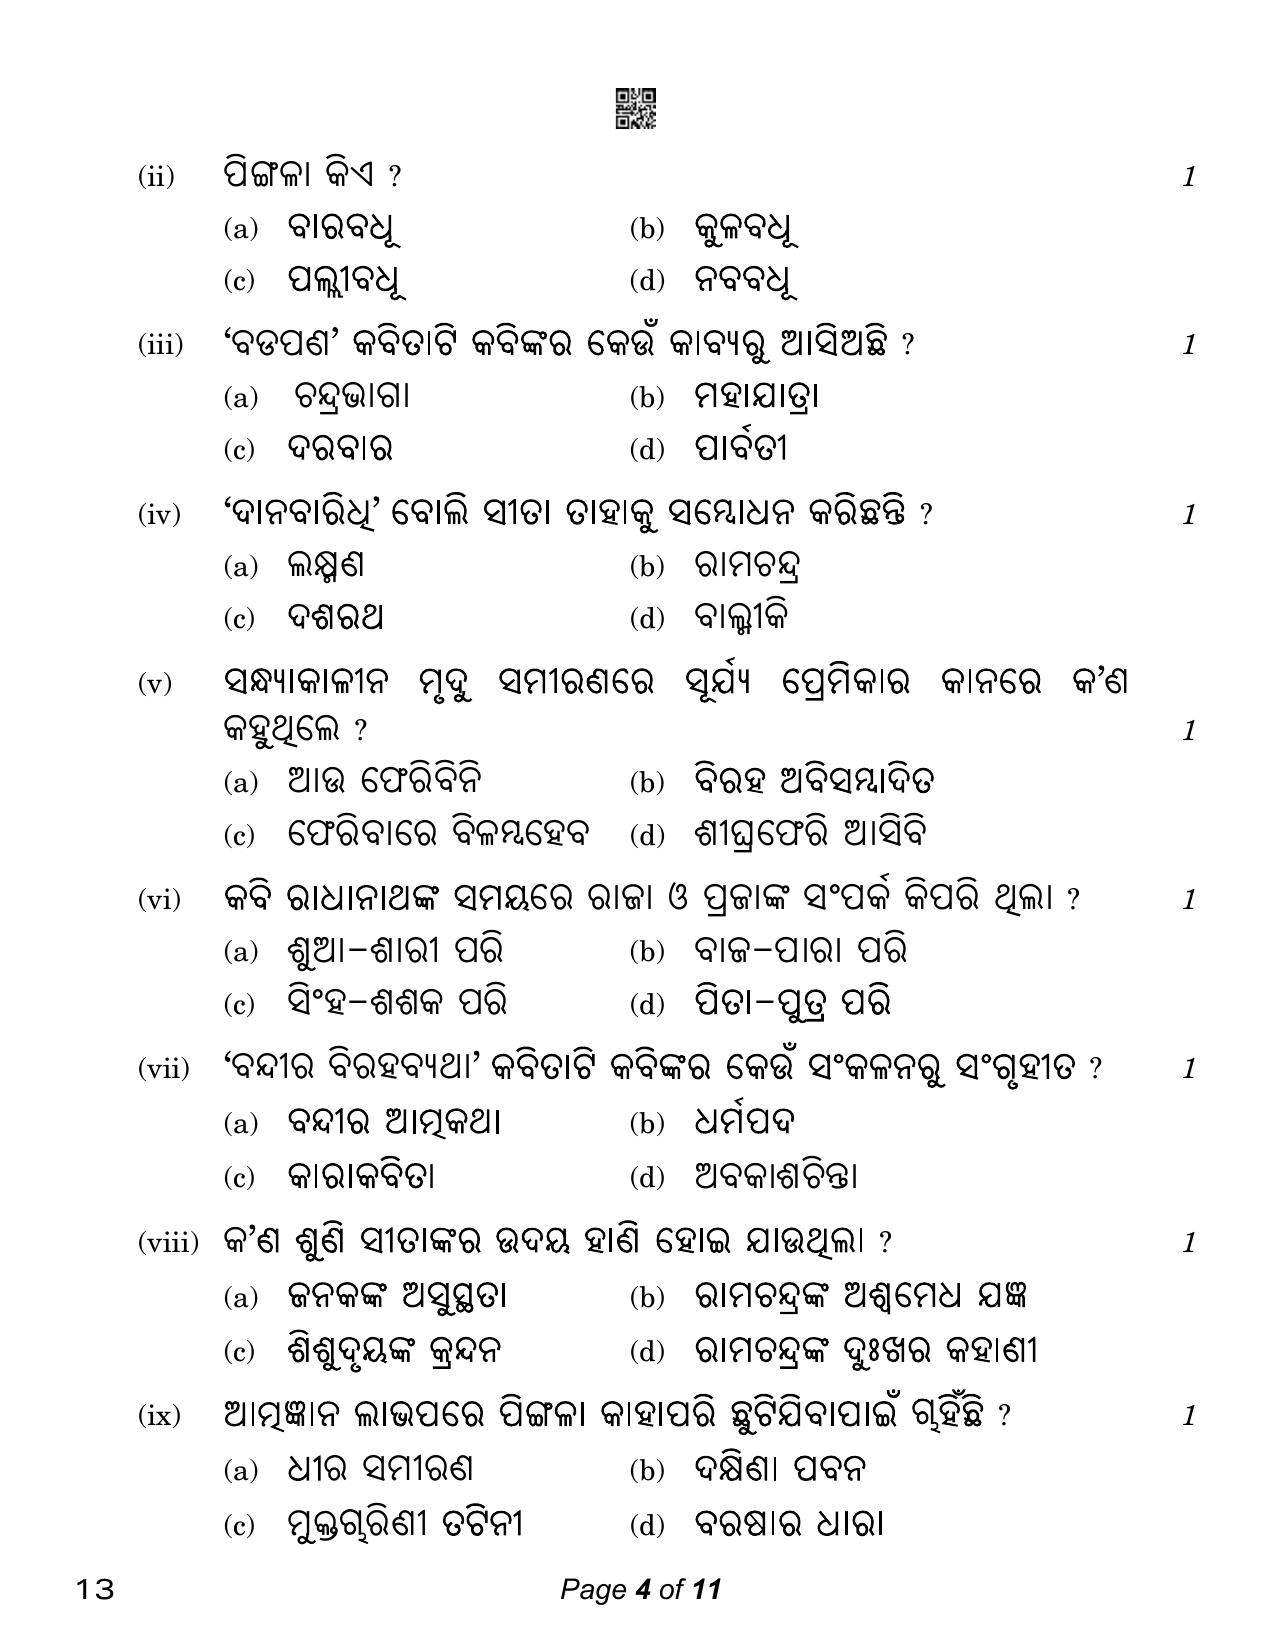 CBSE Class 12 Odia (Compartment) 2023 Question Paper - Page 4